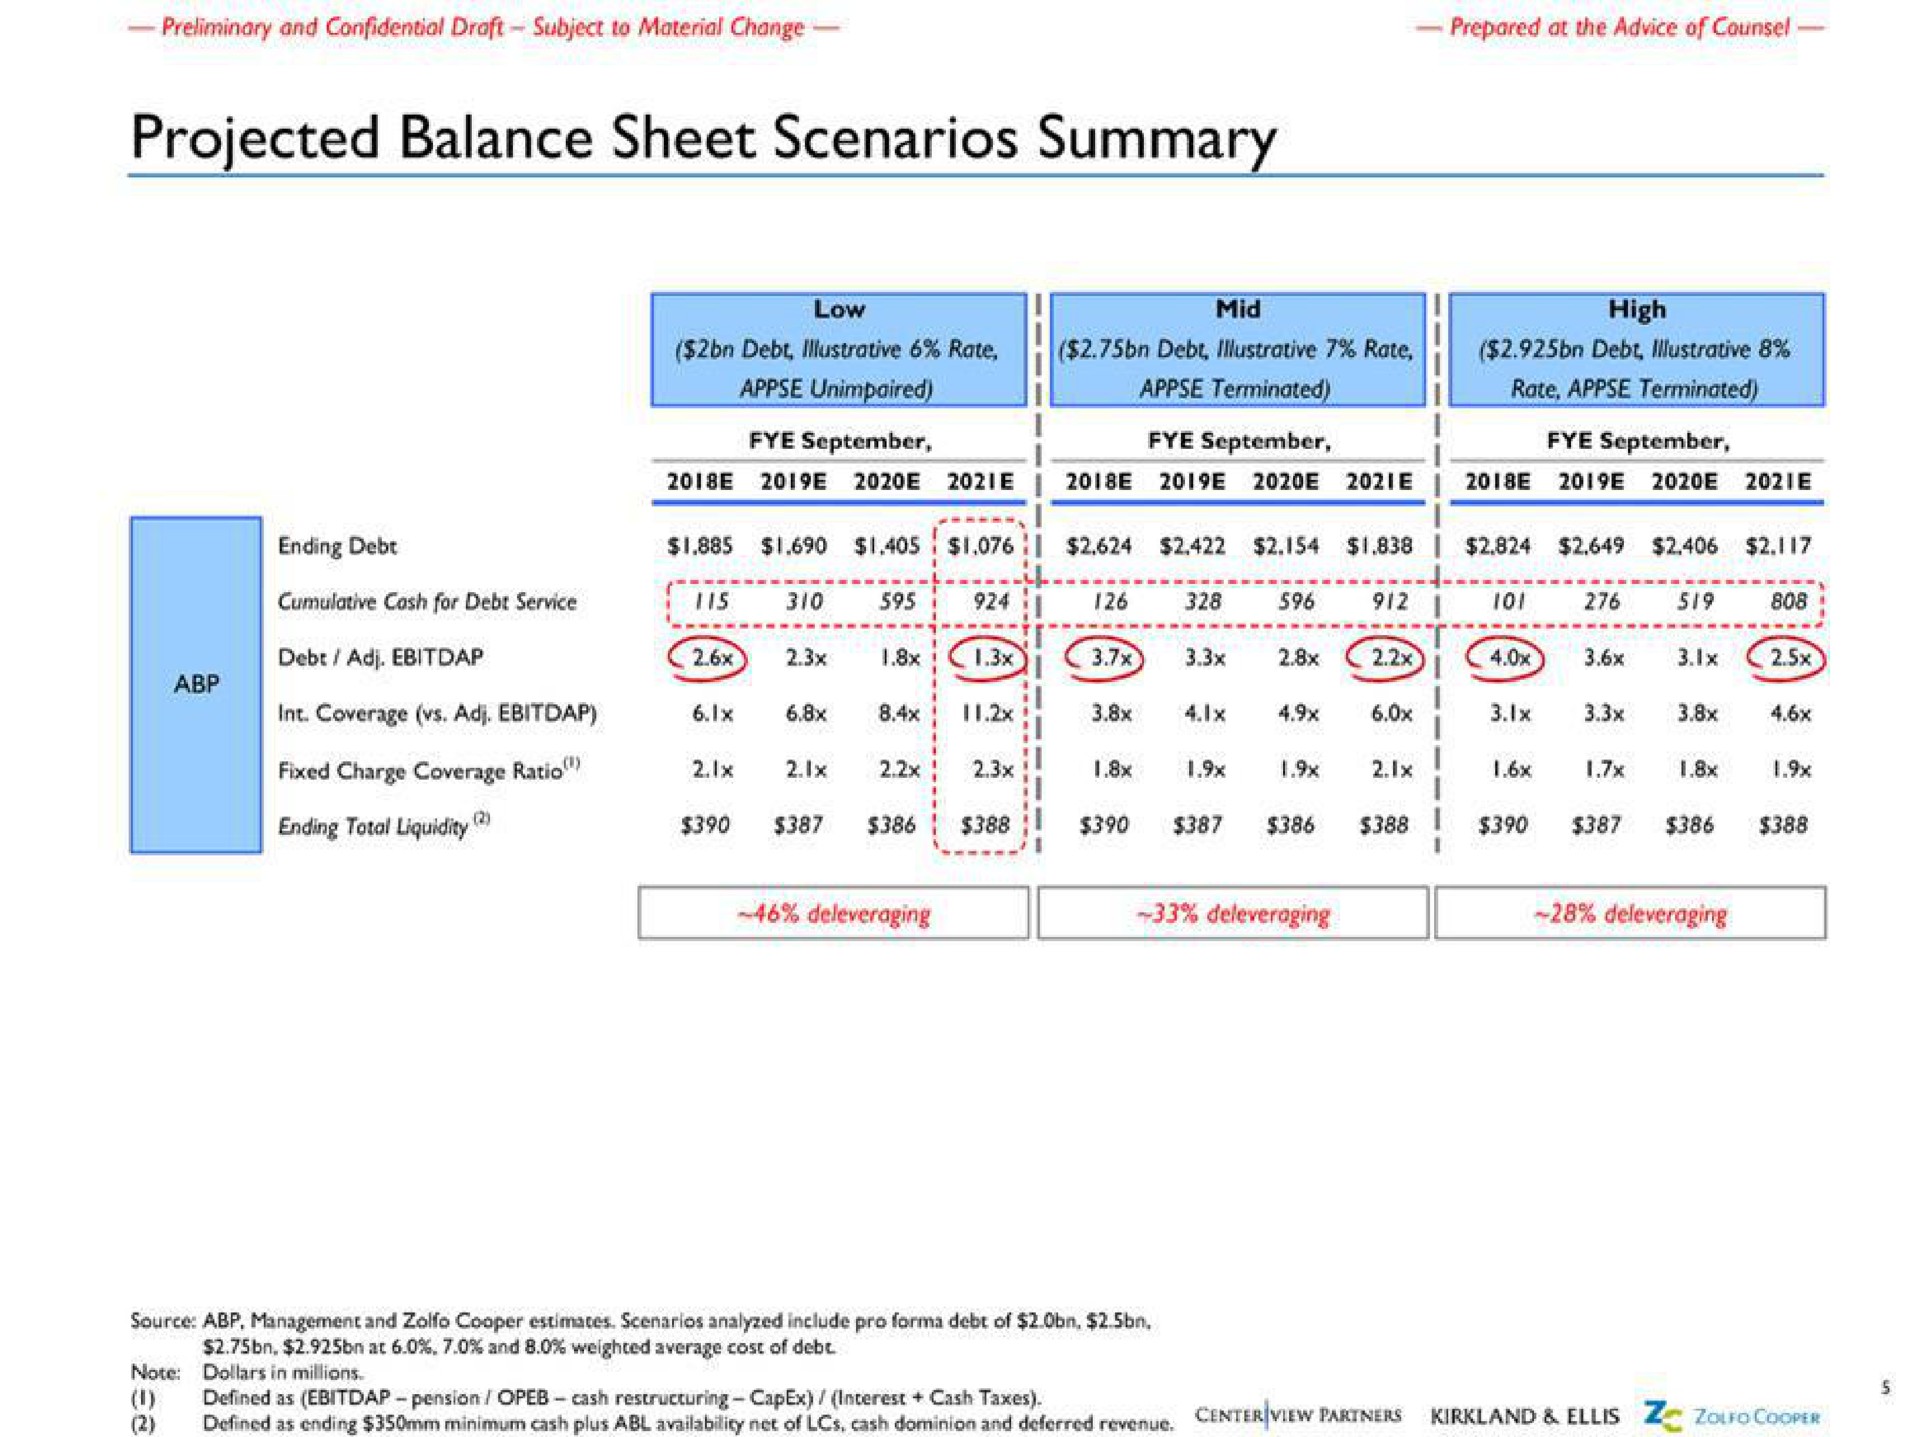 projected balance sheet scenarios summary high mid rix ser see come debt fixed charge coverage ratio ending total liquidity | Centerview Partners